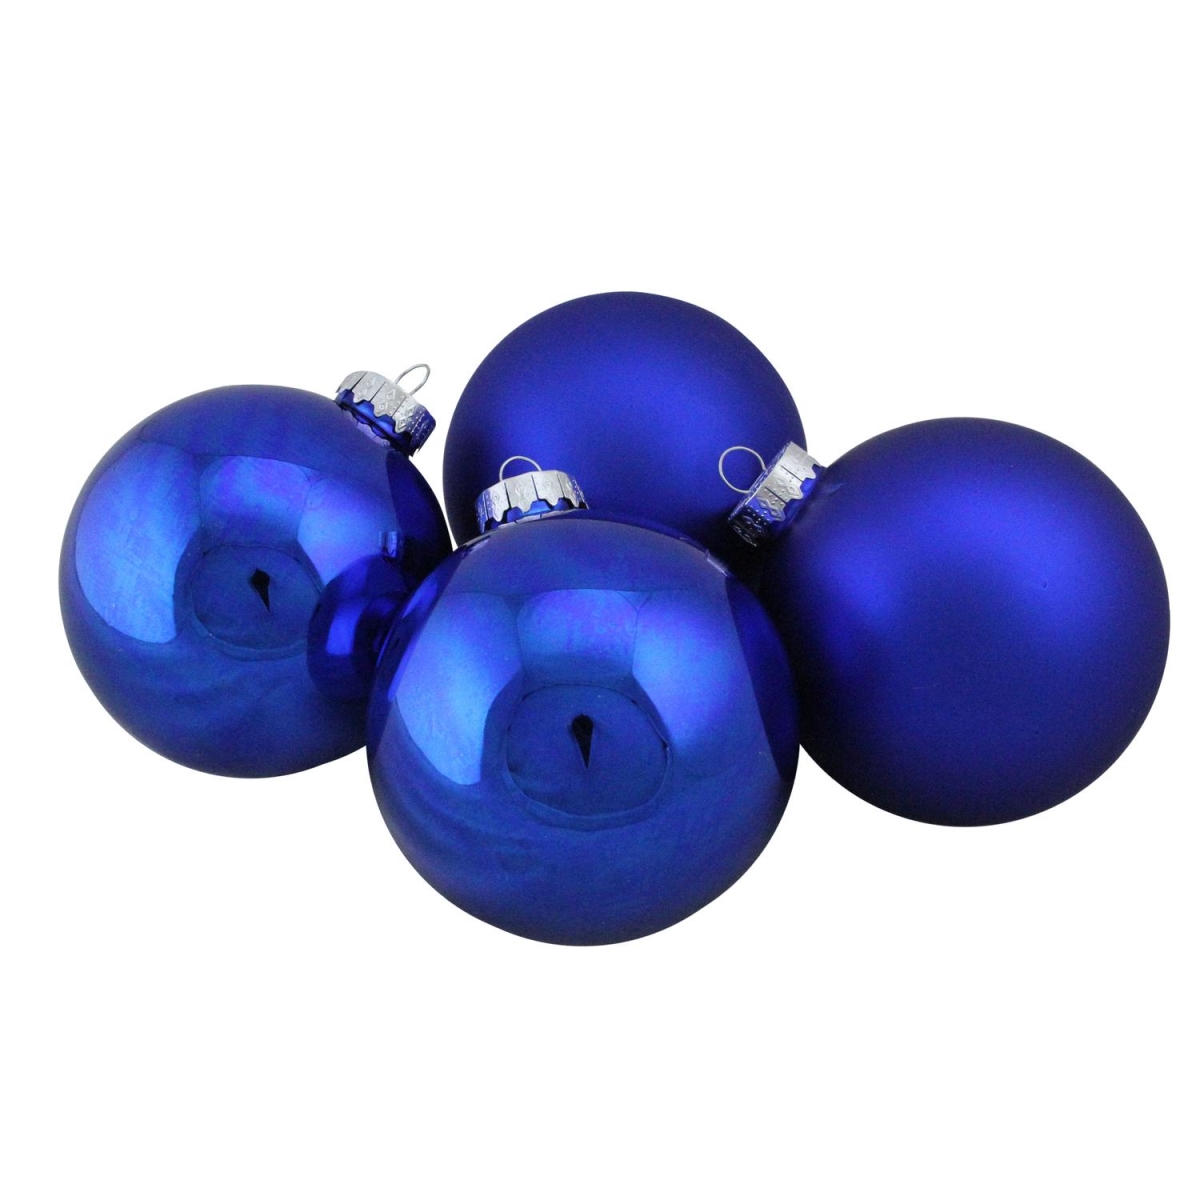 Northlight 32627455 4 in. Glass Ball Christmas Ornament Set, Blue - 4 Piece